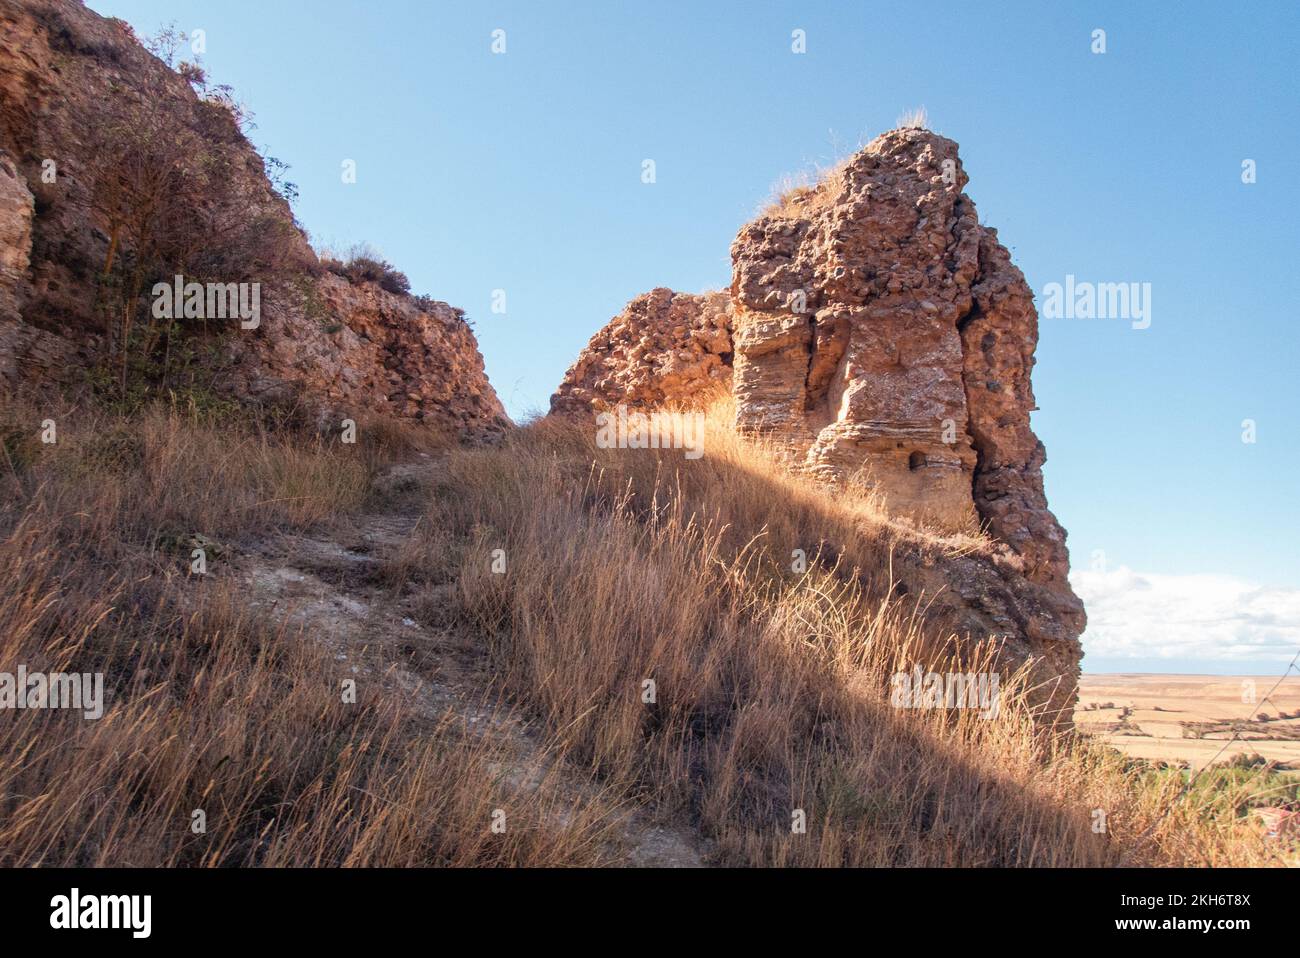 Visibly from afar: the castle hill of Belorado with its ruins of the medieval castle dominates the town at the former border between the historic kingdoms of Castile and Navarra Stock Photo